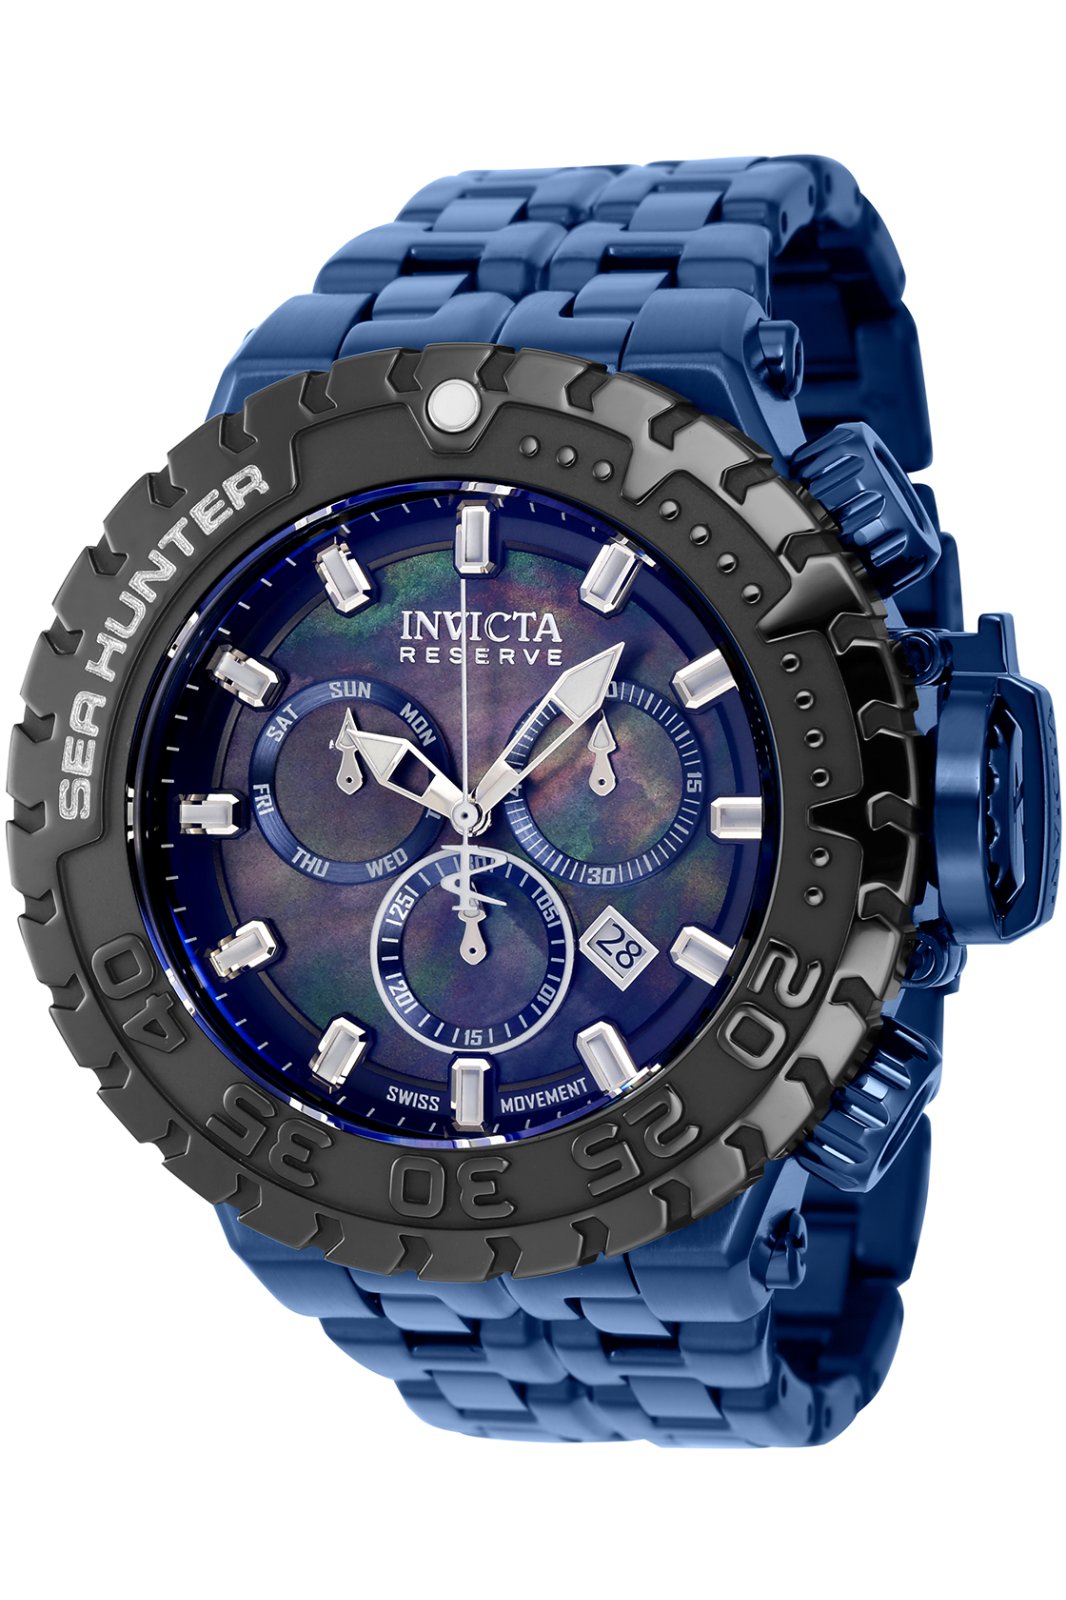 Invicta MLB - St. Louis Cardinals 42997 Men's Automatic Watch - 42mm